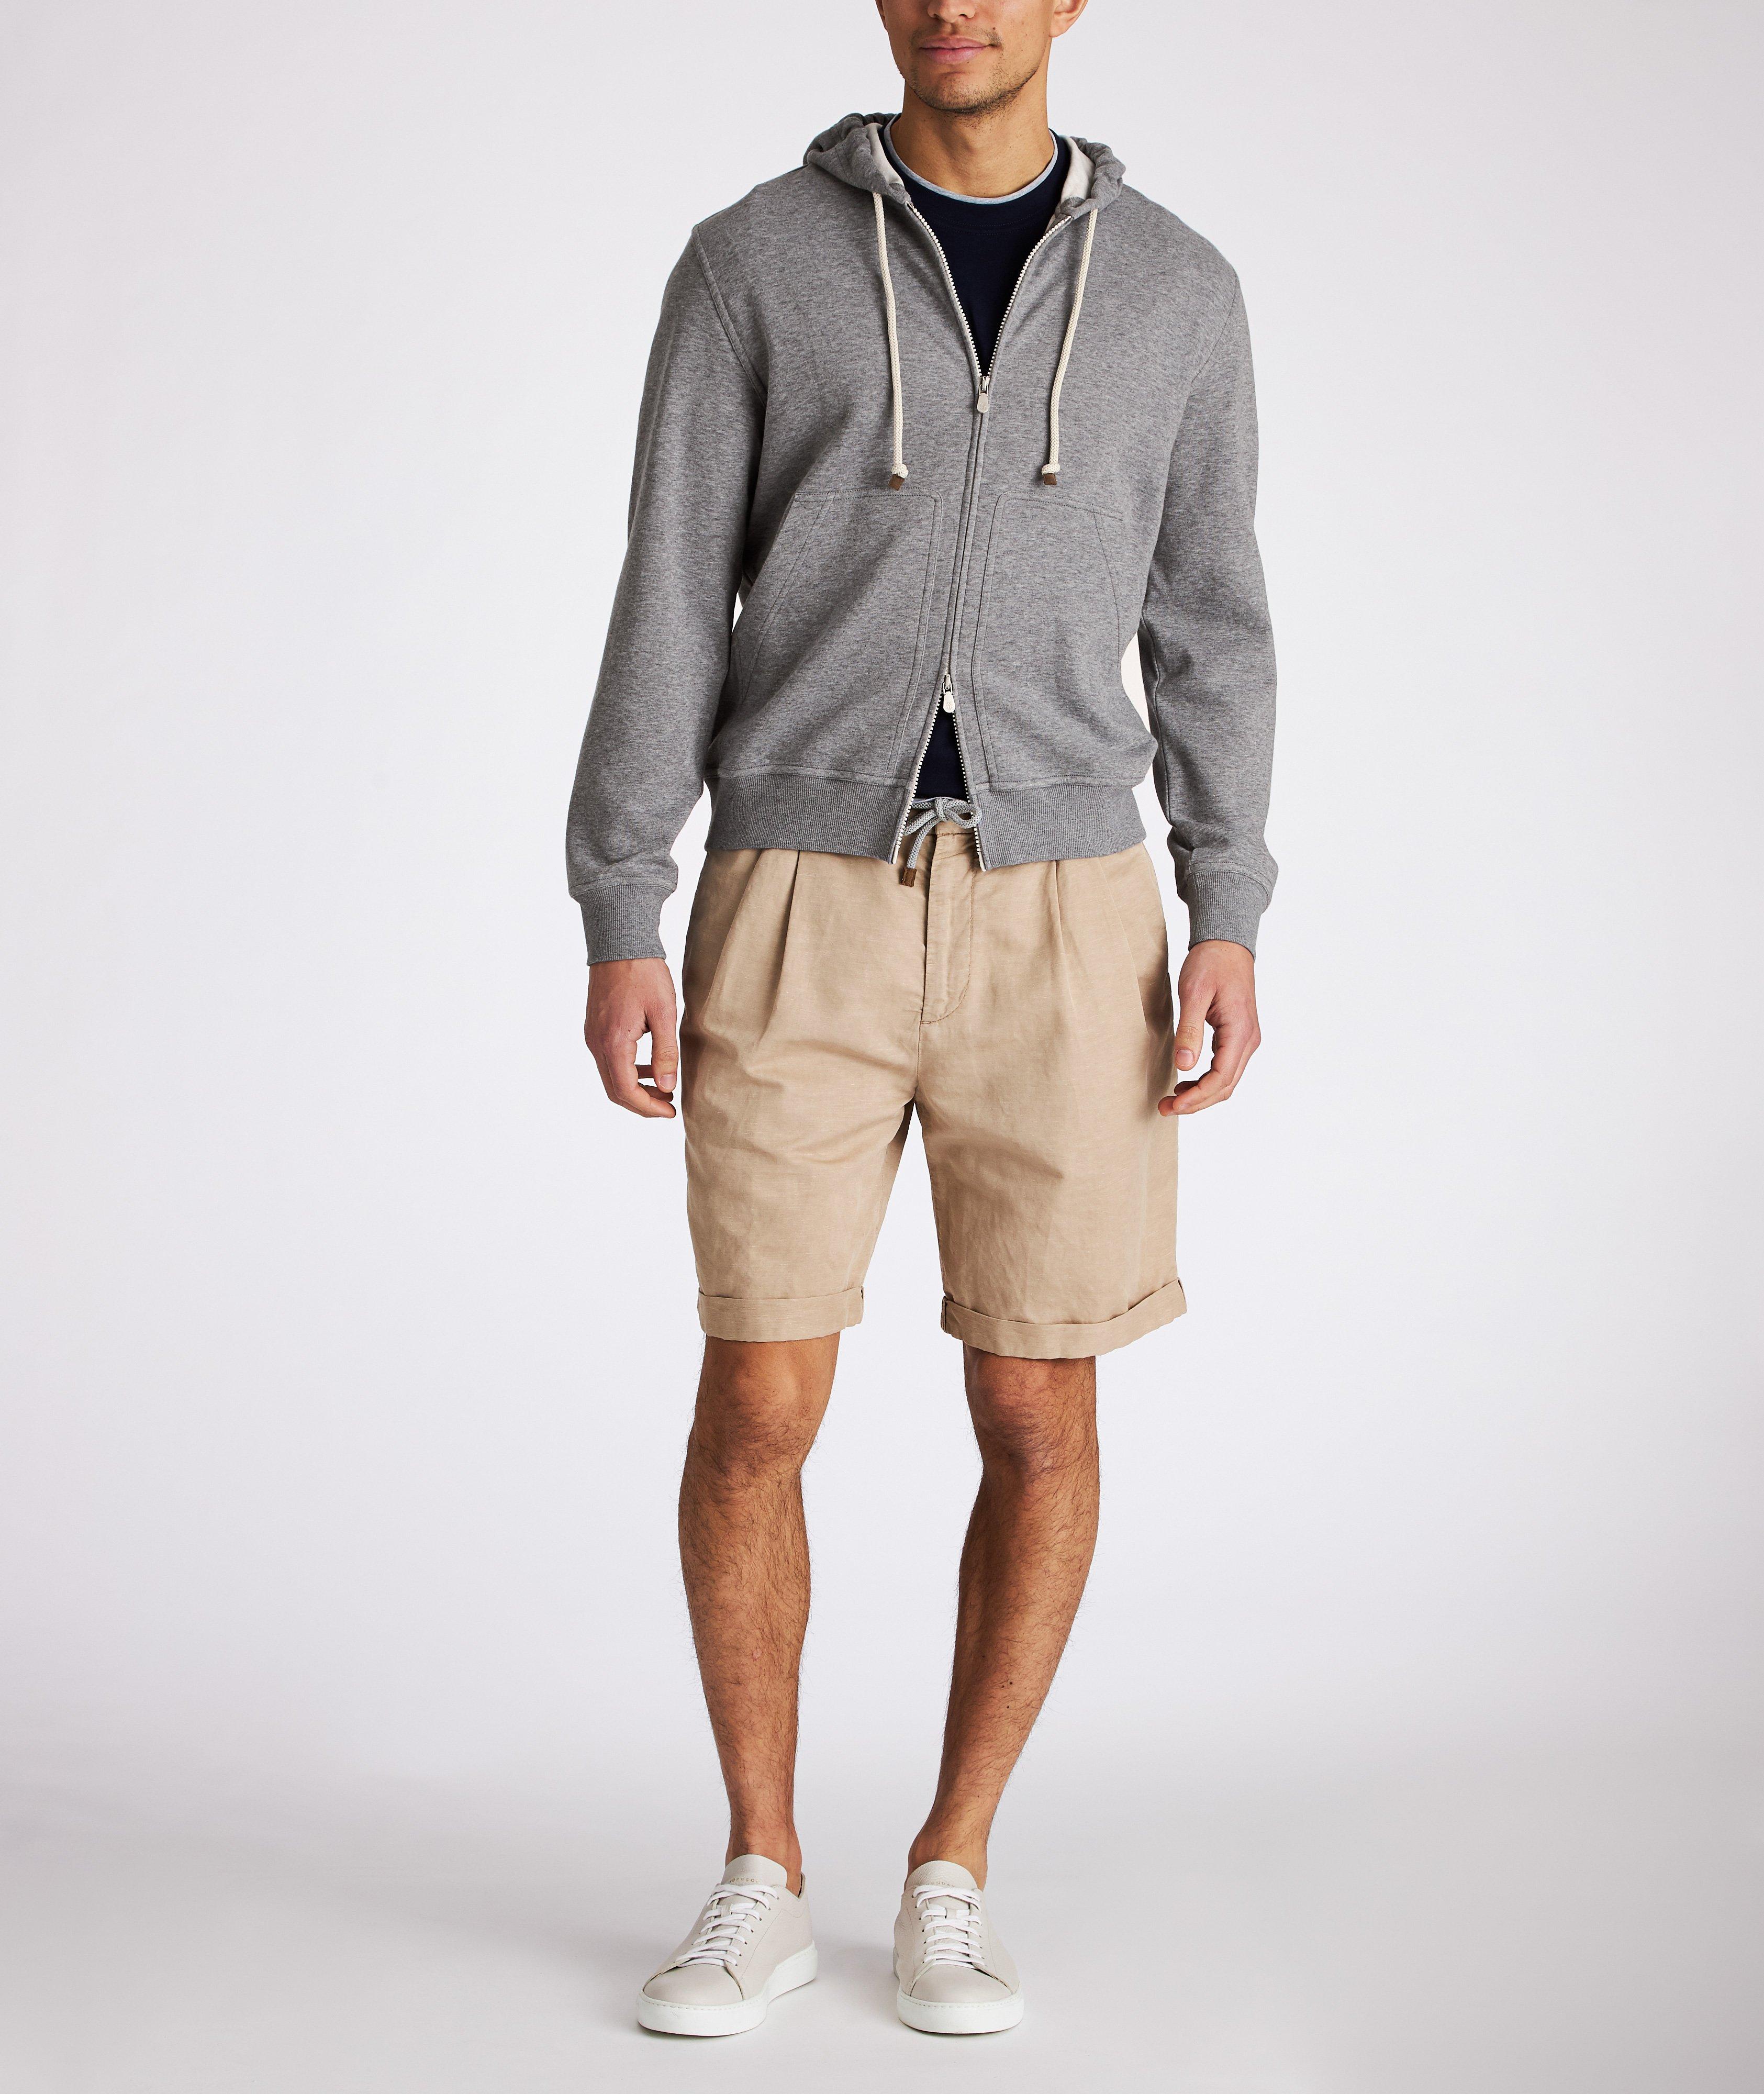 Zip-Up Hooded Sweater image 3